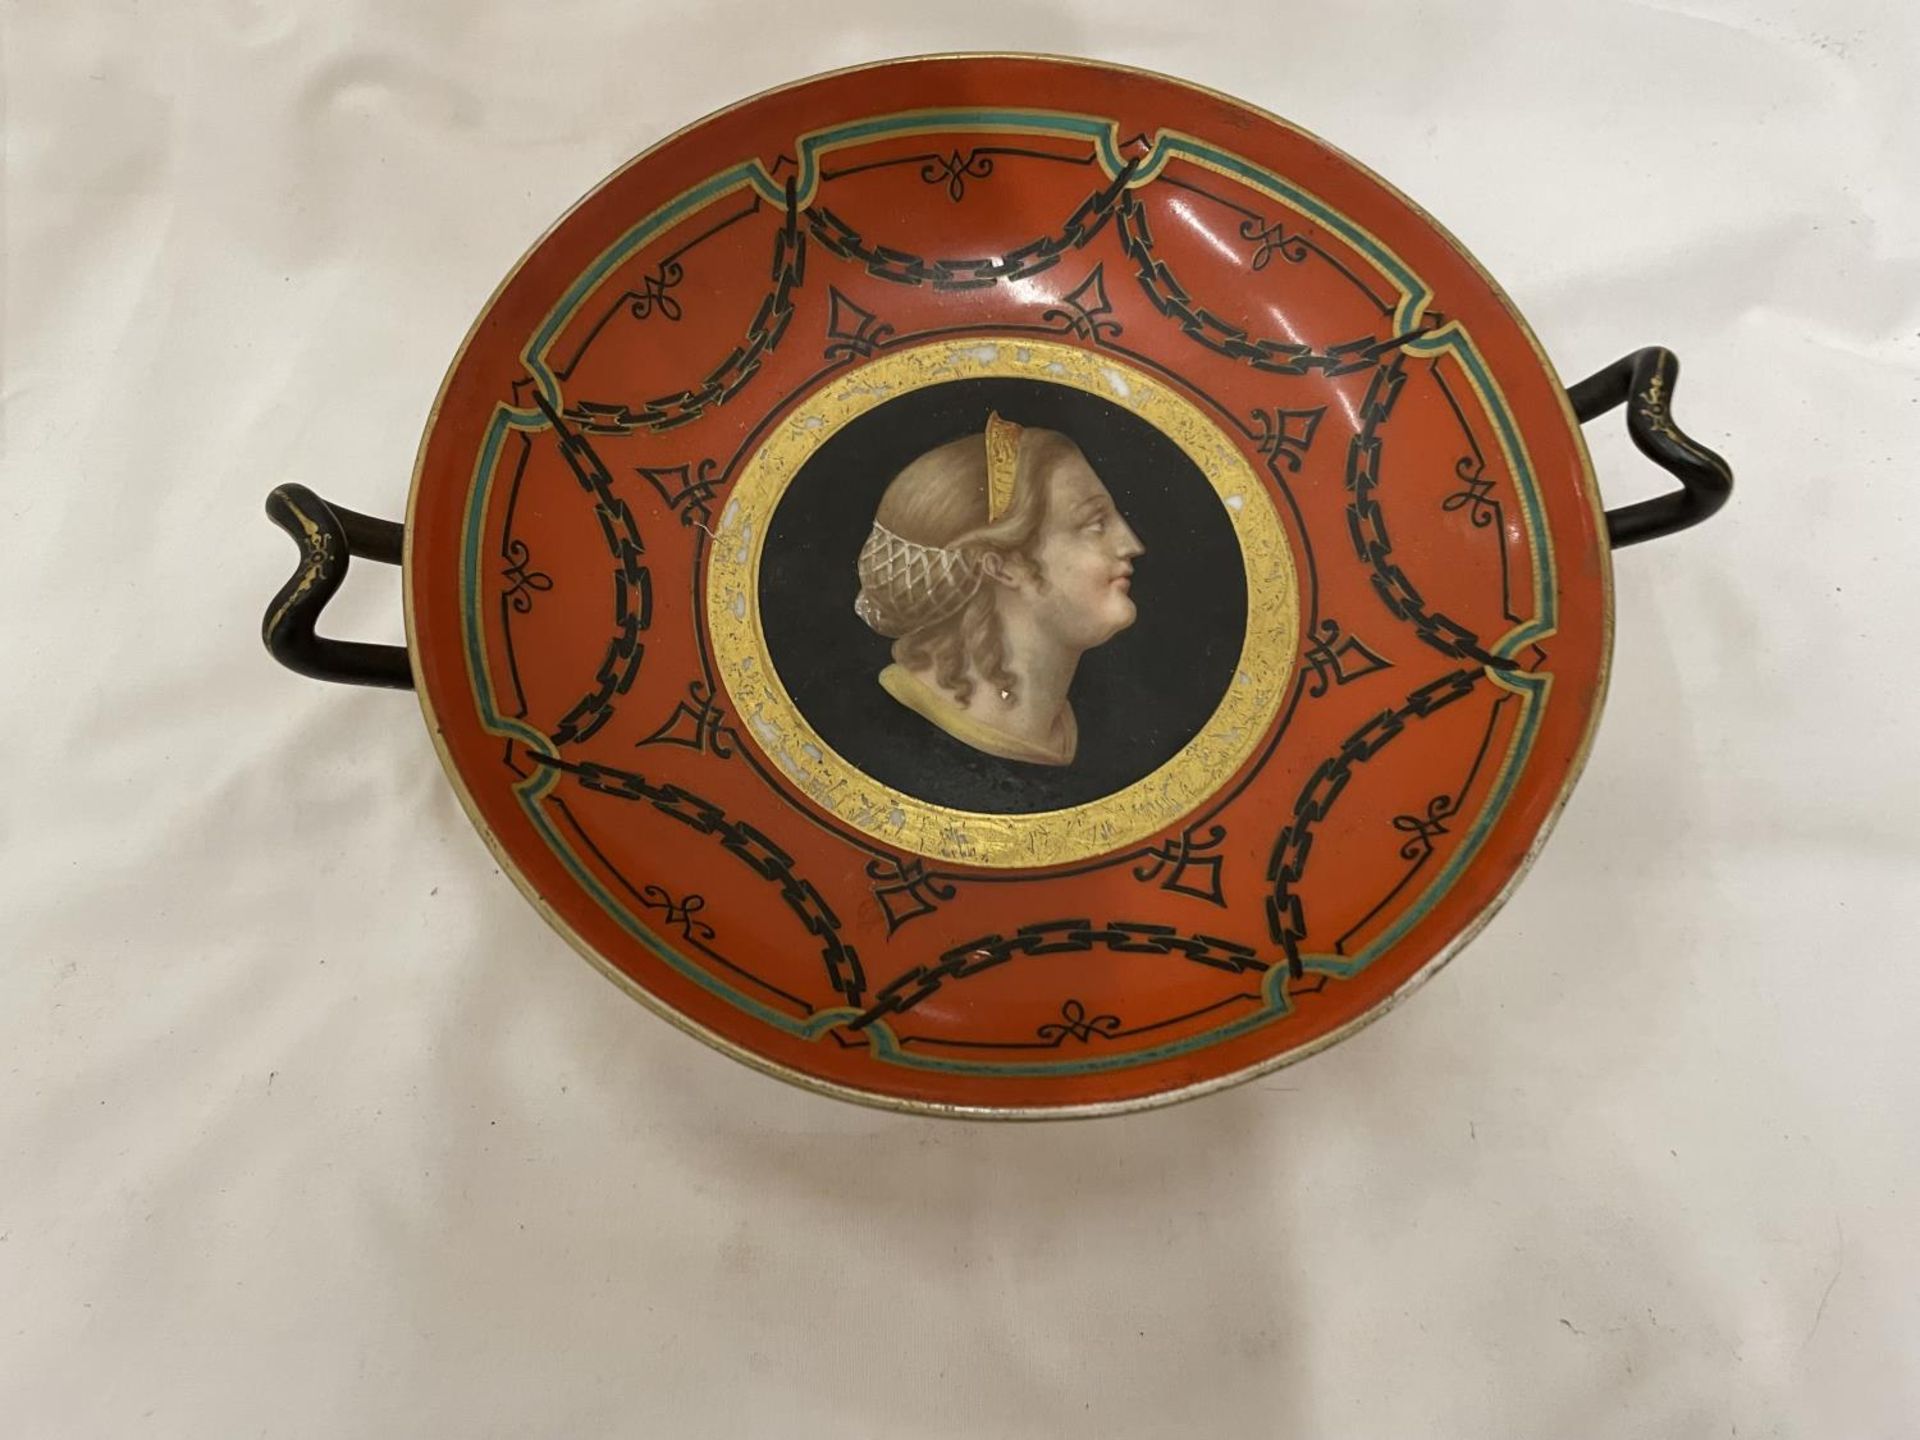 A VICTORIAN HANDLED 'TAZZA' DECORATED IN RED WITH A LADY'S PORTRAIT IN THE MIDDLE HEIGHT 9CM,